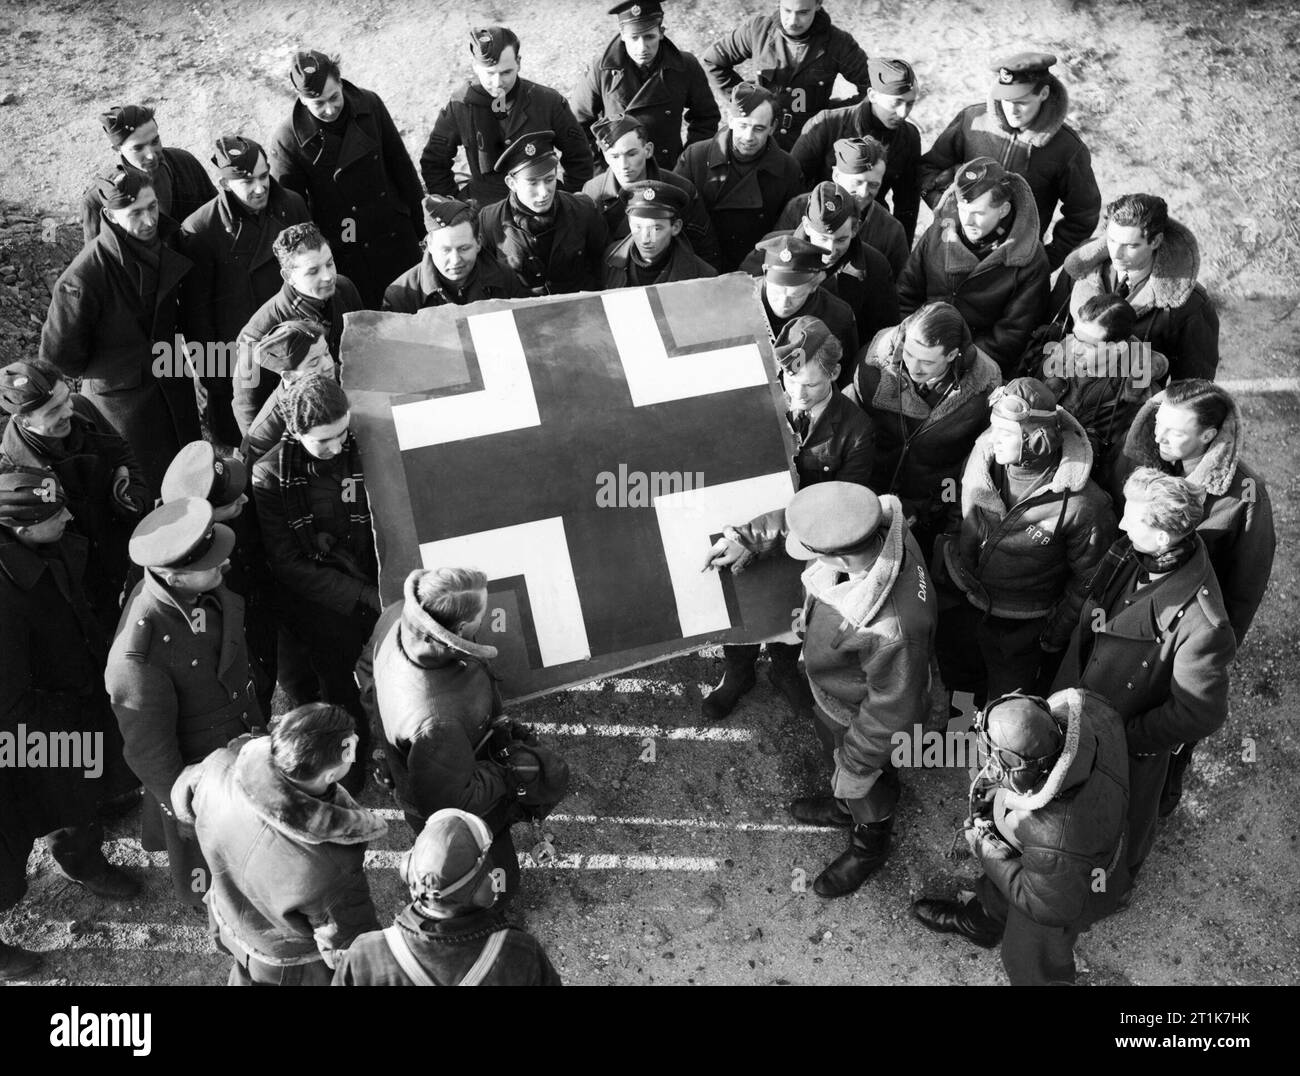 Royal Air Force 1939-1945- Fighter Command Pilots and ground crew gather around the fuselage Balkenkreuz from No 87 Squadron's first kill, a Heinkel He111 shot down by Flight Lieutenant Robert Voase-Jeff on 2 November 1939. Pilot Officer Dennis David, who damaged another Heinkel on the same day, autographs the trophy. Watching on the right is a new member of the squadron, Pilot Officer Roland Beamont (in flying helmet, with initials on his Irvin flying jacket), a future ace and famous postwar test-pilot. Stock Photo